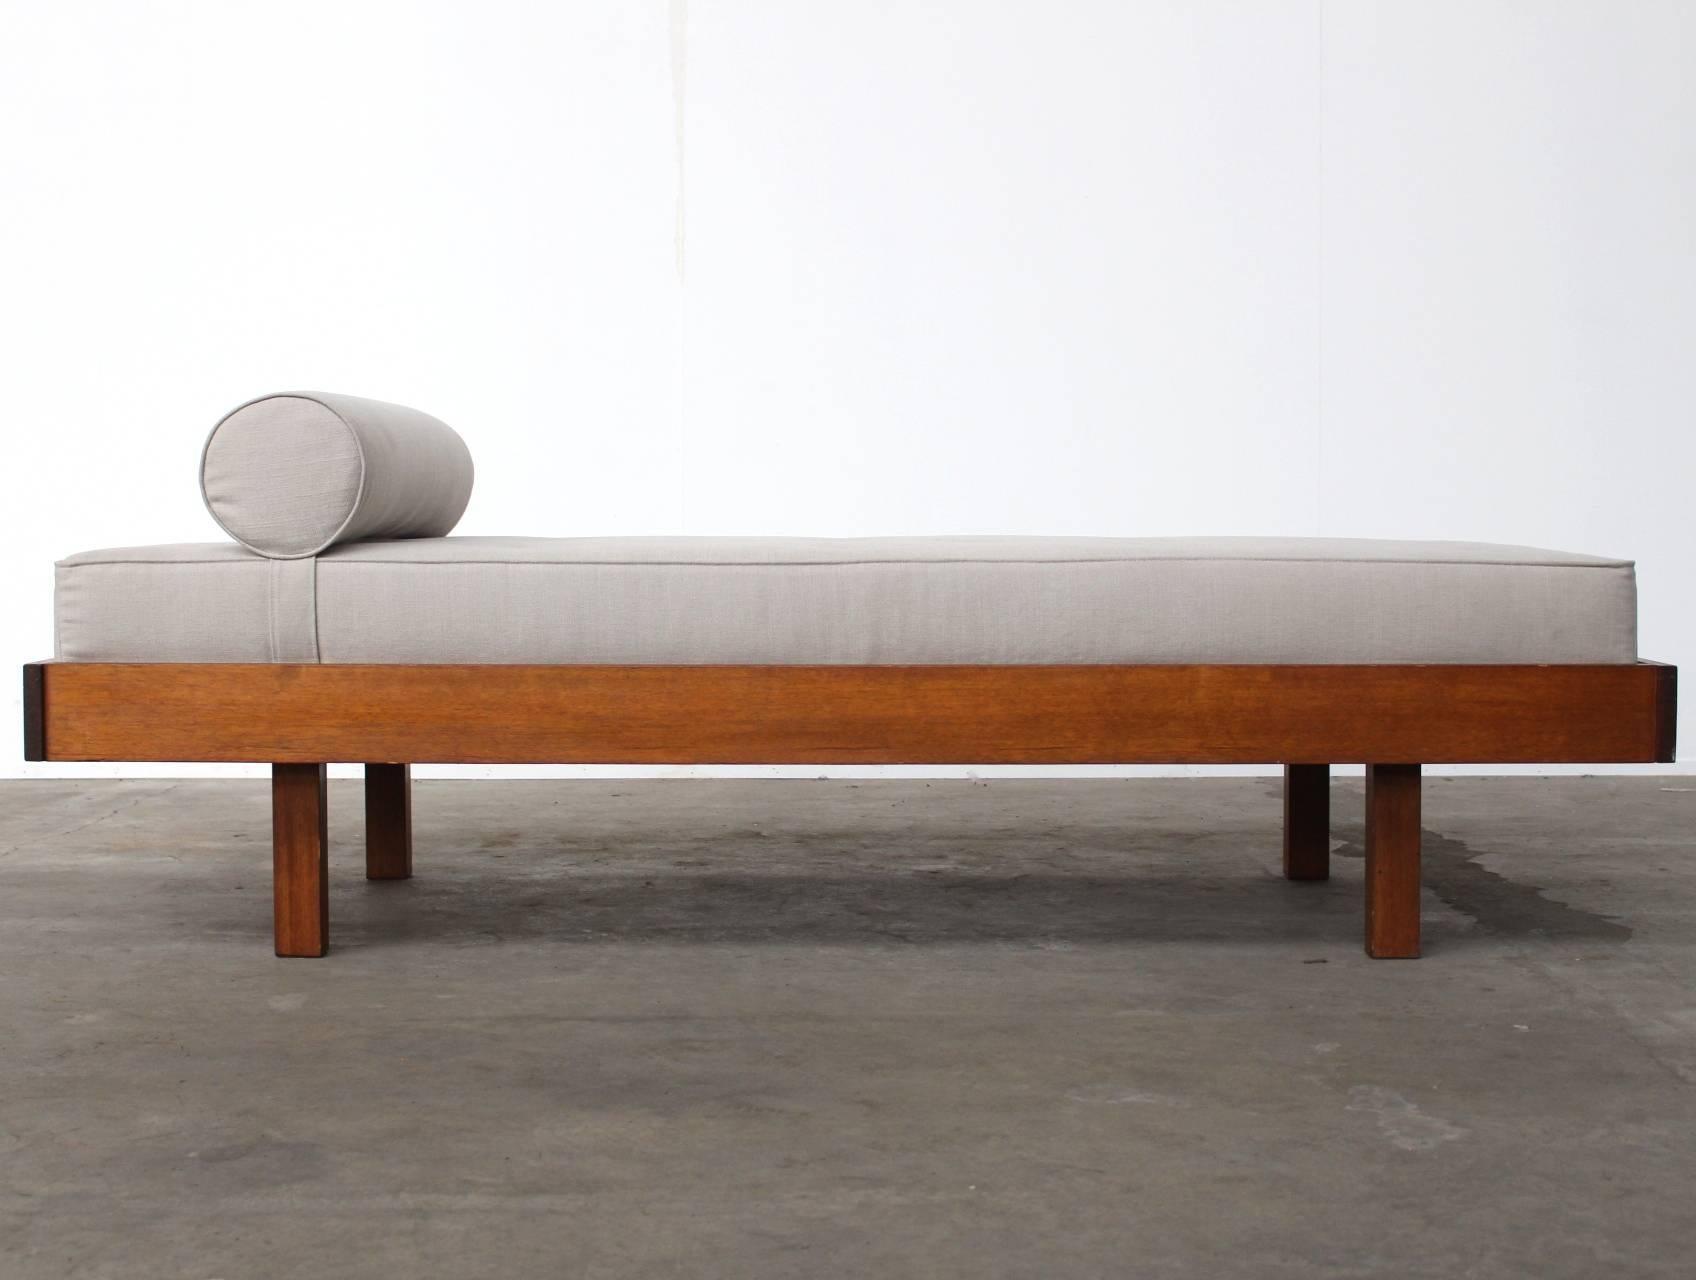 French daybed from the 1950s attributed to Charlotte Perriand.
Master hand-crafted massive oak wooden frame with beautiful double mortise-and-tenon joints; see picture 9.
The outline of the oak frame is identical to the Perriand Cansado daybed, up